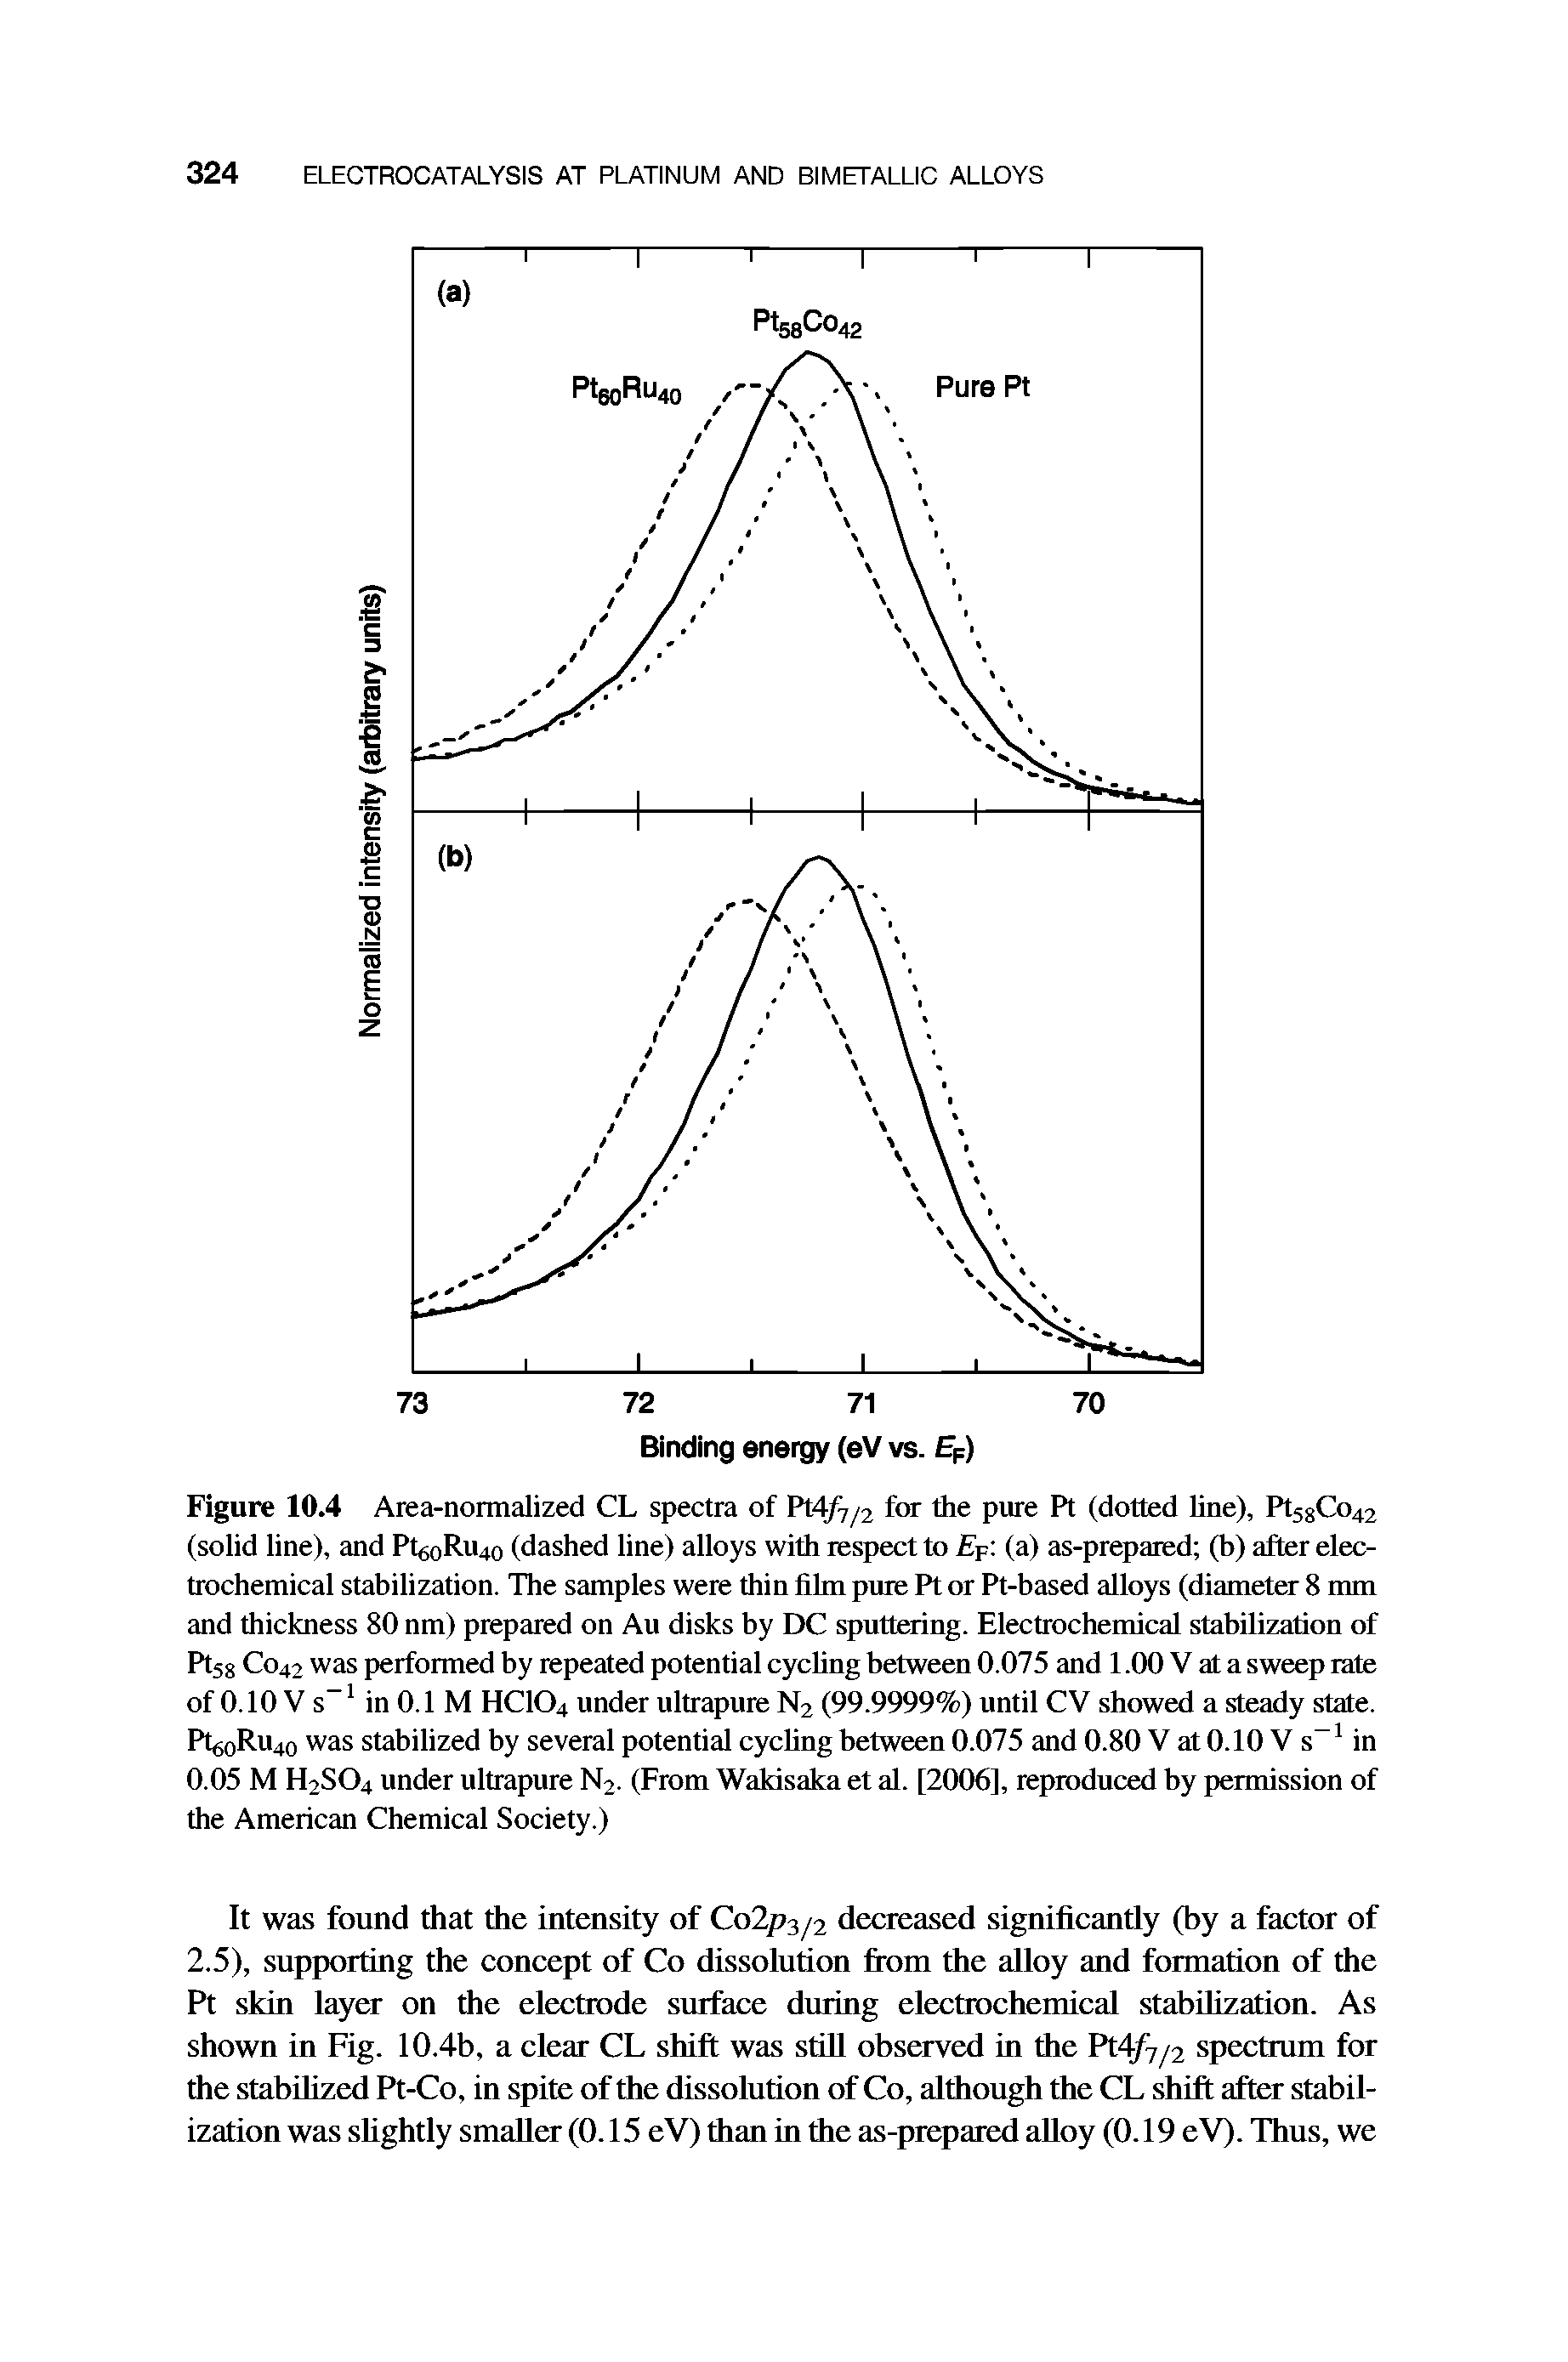 Figure 10.4 Area-normalized CL spectra of Pt4/7/2 for the pure Pt (dotted Une), Pt5gCo42 (solid line), and PtgoRu4o (dashed line) alloys with respect to p (a) as-prepared (h) after electrochemical stabilization. The samples were thin film pure Pt or Pt-based alloys (diameter 8 mm and thickness 80 nm) prepared on Au disks by DC sputtering. Electrochemical stabilization of Pt58 C042 was performed by repeated potential cycling between 0.075 and 1.00 V at a sweep rate of 0.10 V s in 0.1 M HCIO4 under ultrapure N2 (99.9999%) until CV showed a steady state. PtgoRu4o was stabilized by several potential cycling between 0.075 and 0.80 V at 0.10 V s in 0.05 M H2SO4 under ultrapure N2. (From Wakisaka et al. [2006], reproduced by permission of the American Chemical Society.)...